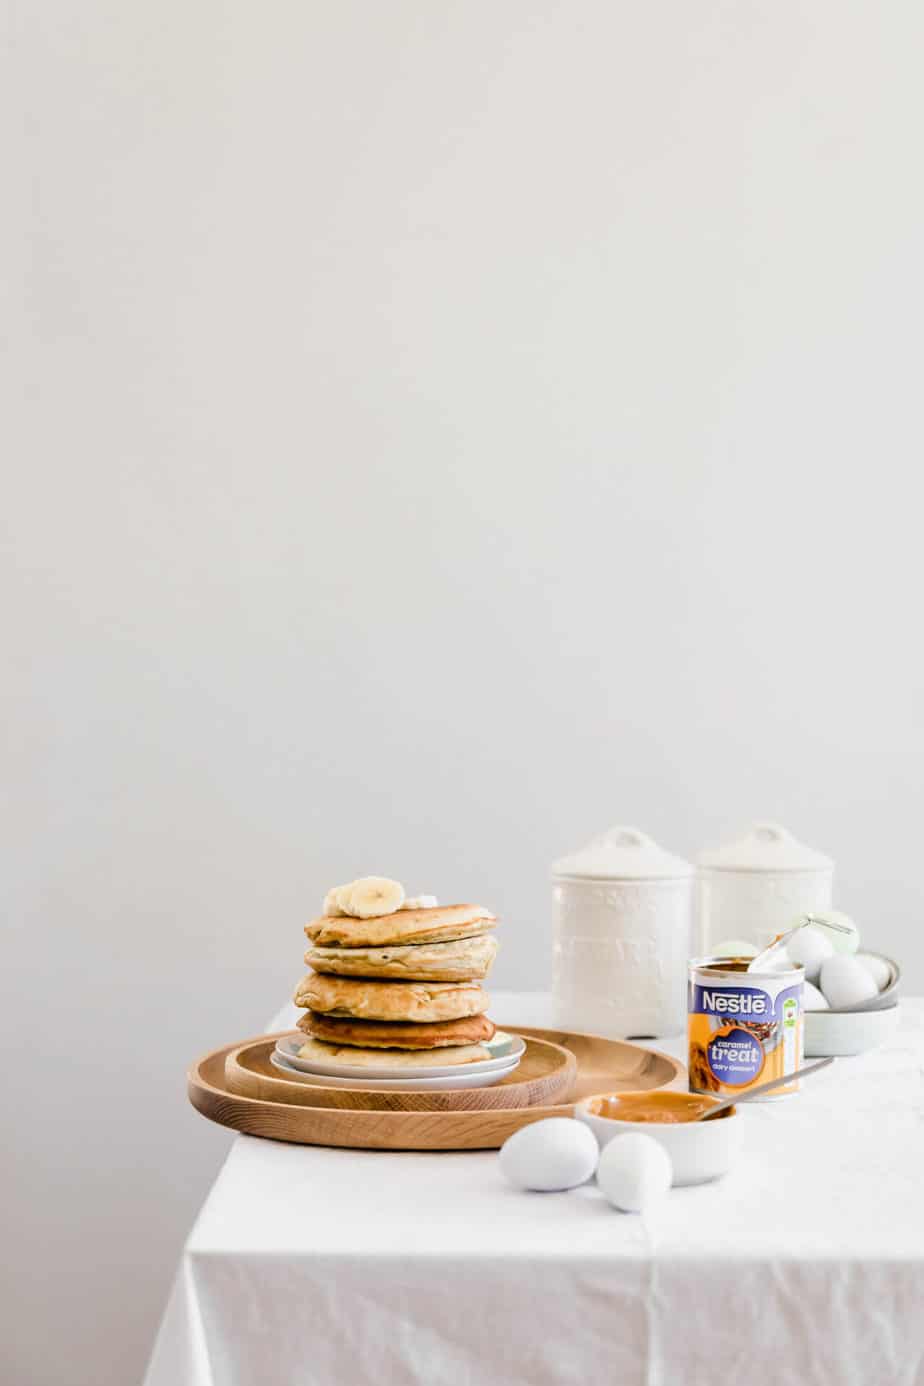 A stack of pancakes on a wooden plate on the edge of a table.